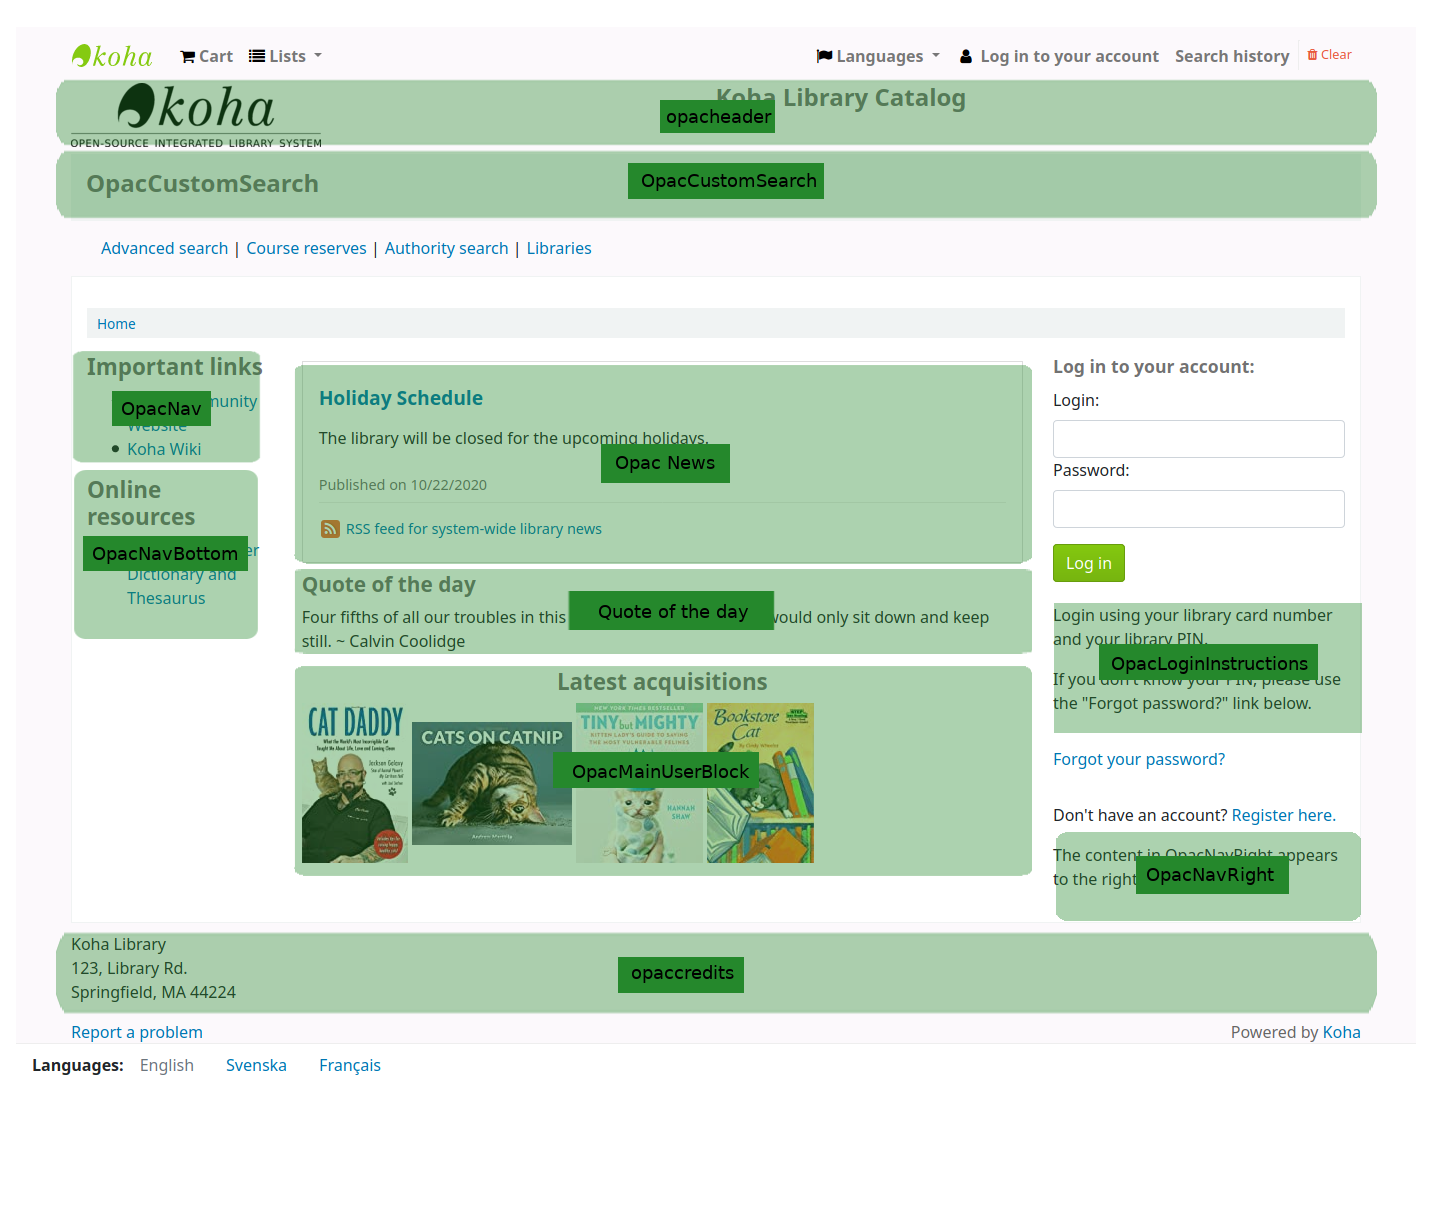 View of the main page of the OPAC, customized, and with each section highlighted and labeled